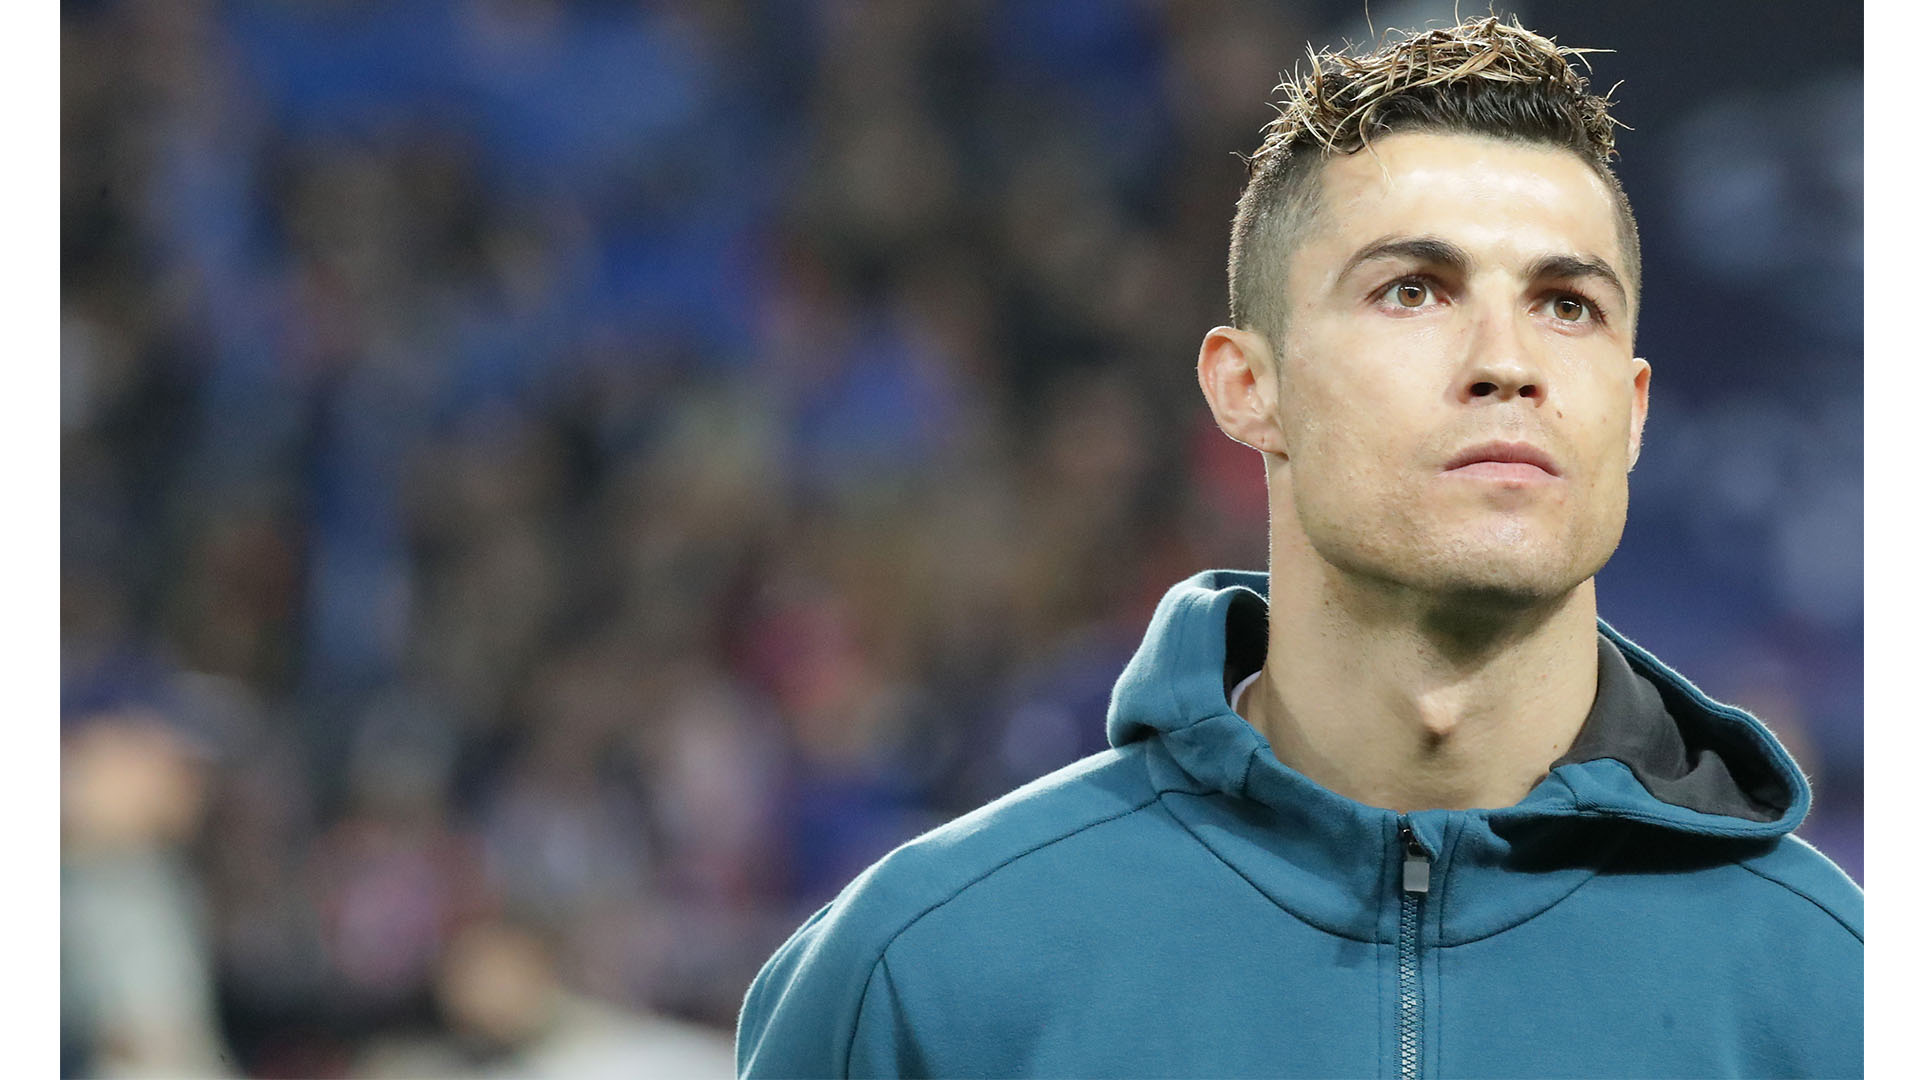 Cristiano Ronaldo just shaved all of his hair off - have you seen?